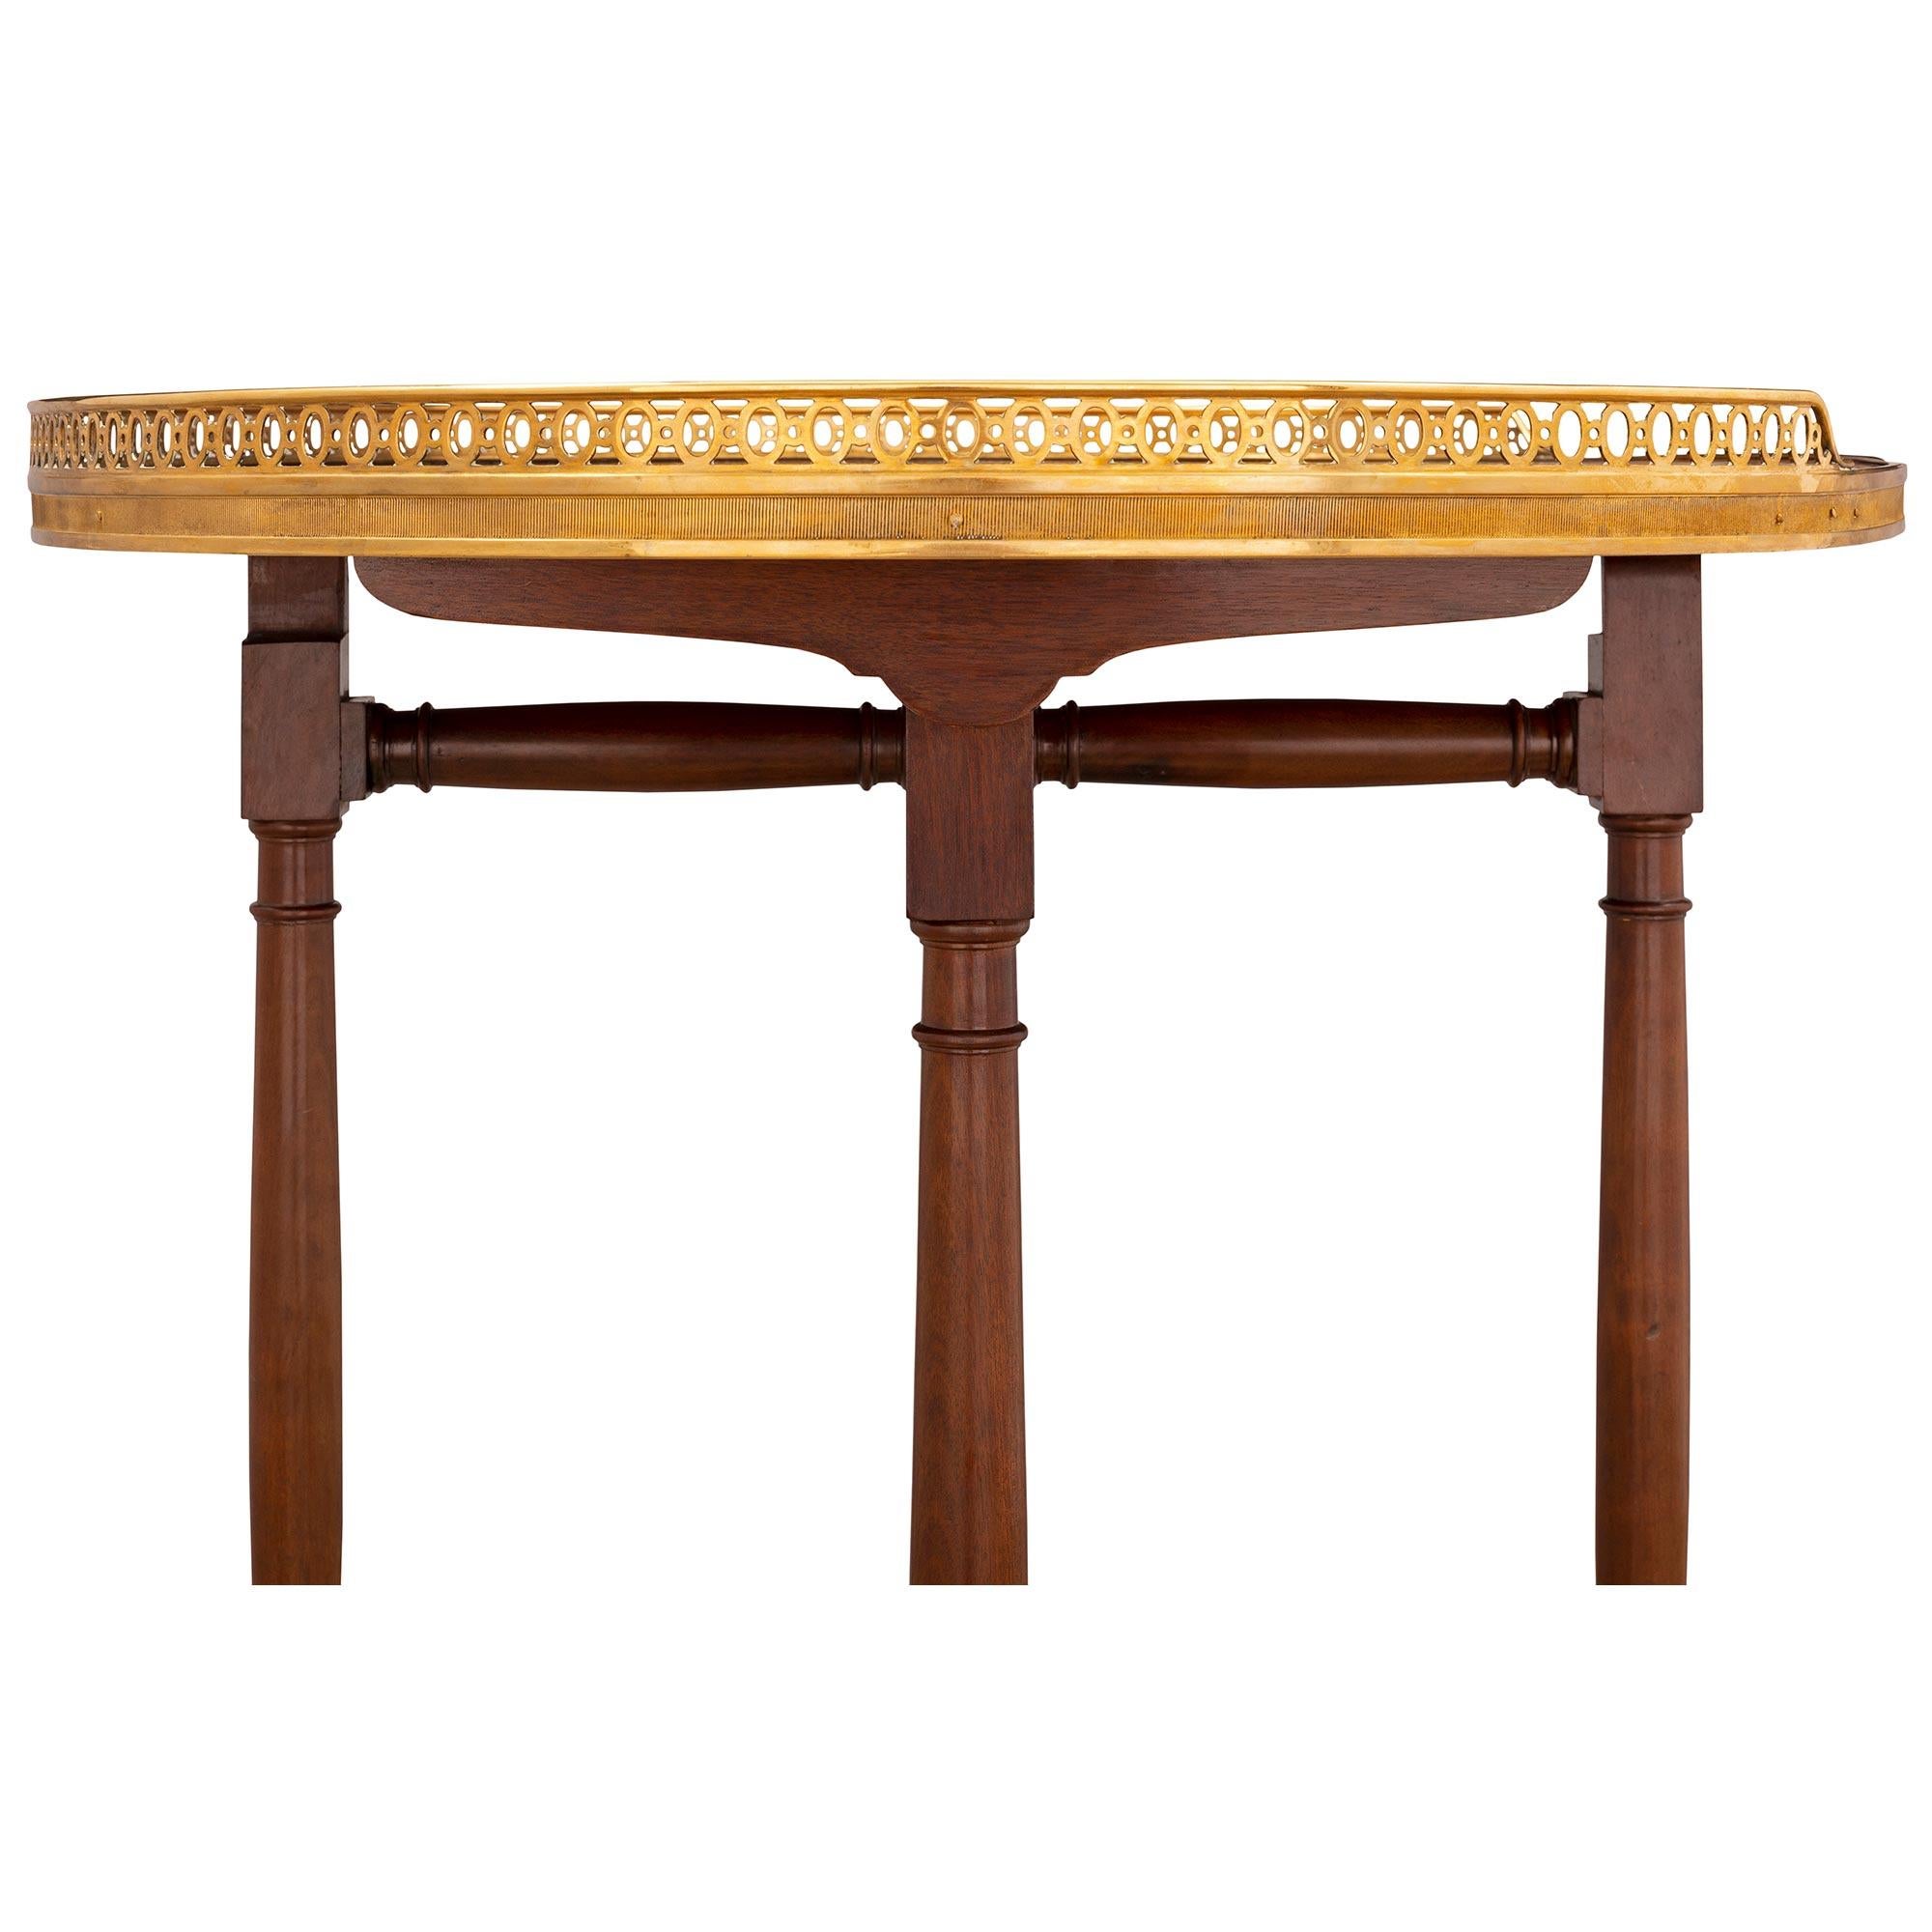 French Mid-19th Century Louis XVI Style Mahogany Gateleg Table For Sale 4